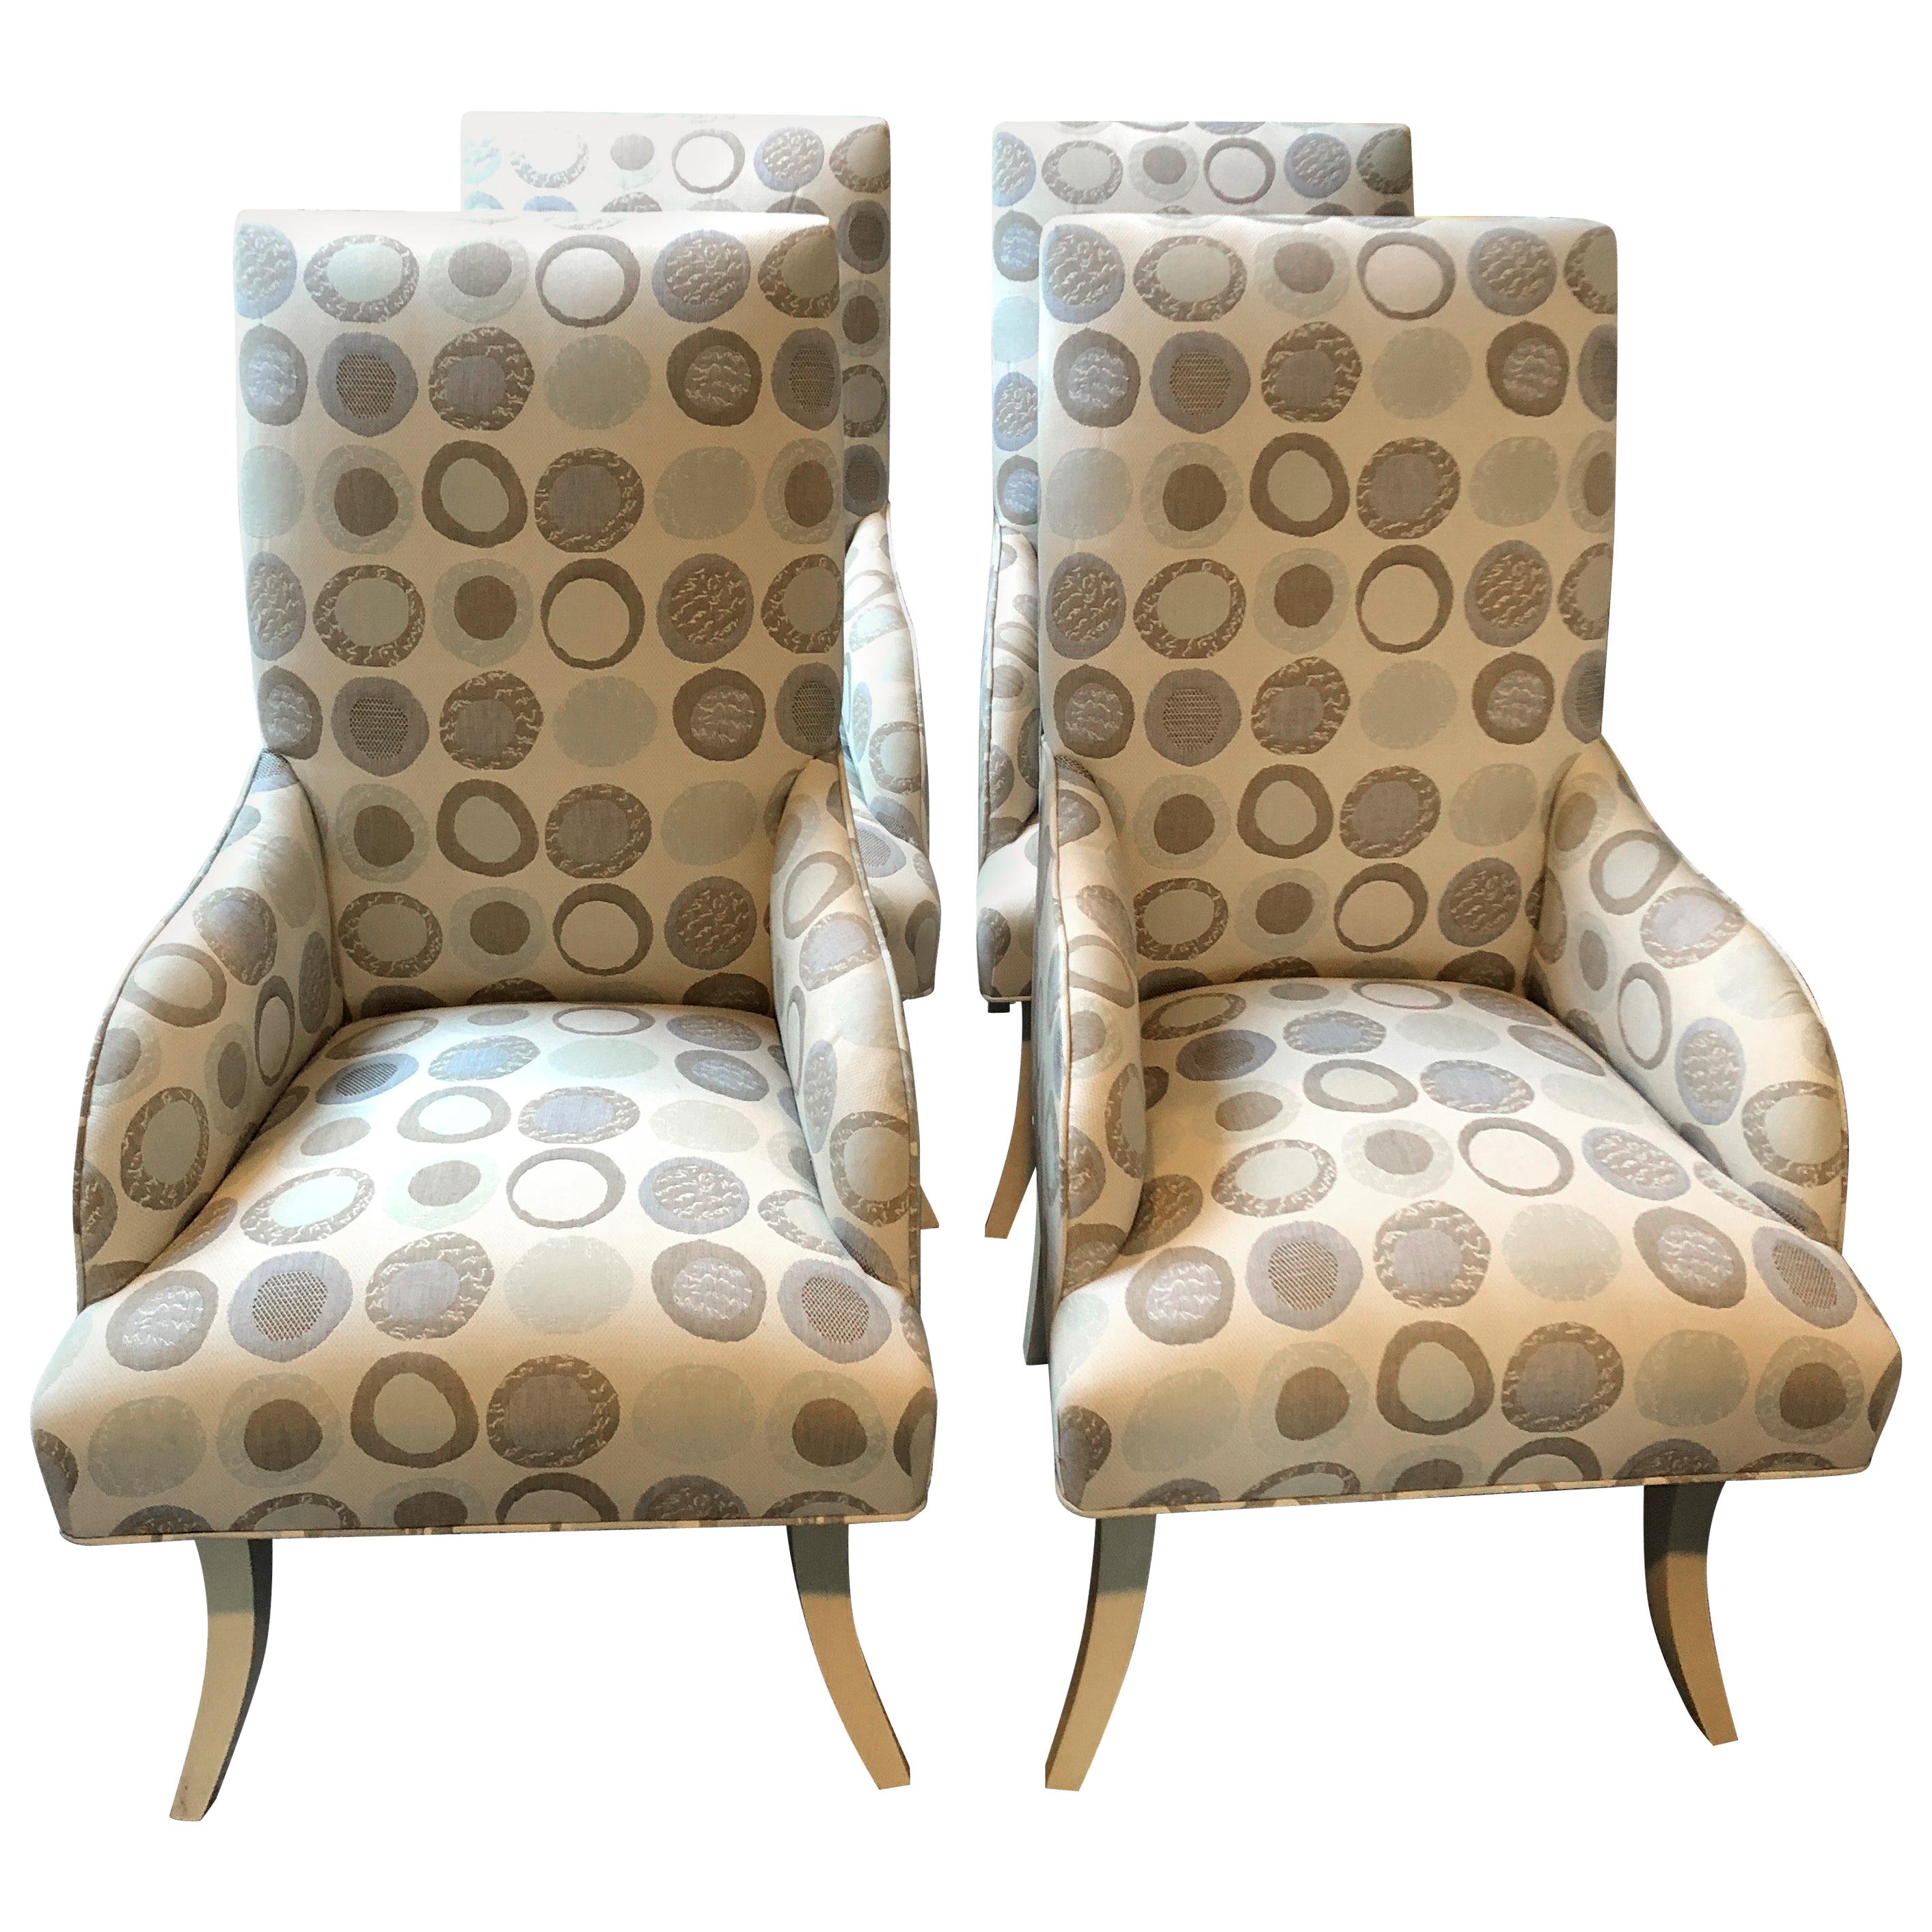 Cool Set Of 4 Custom Dining Chairs With, Custom Fabric Upholstered Dining Chairs